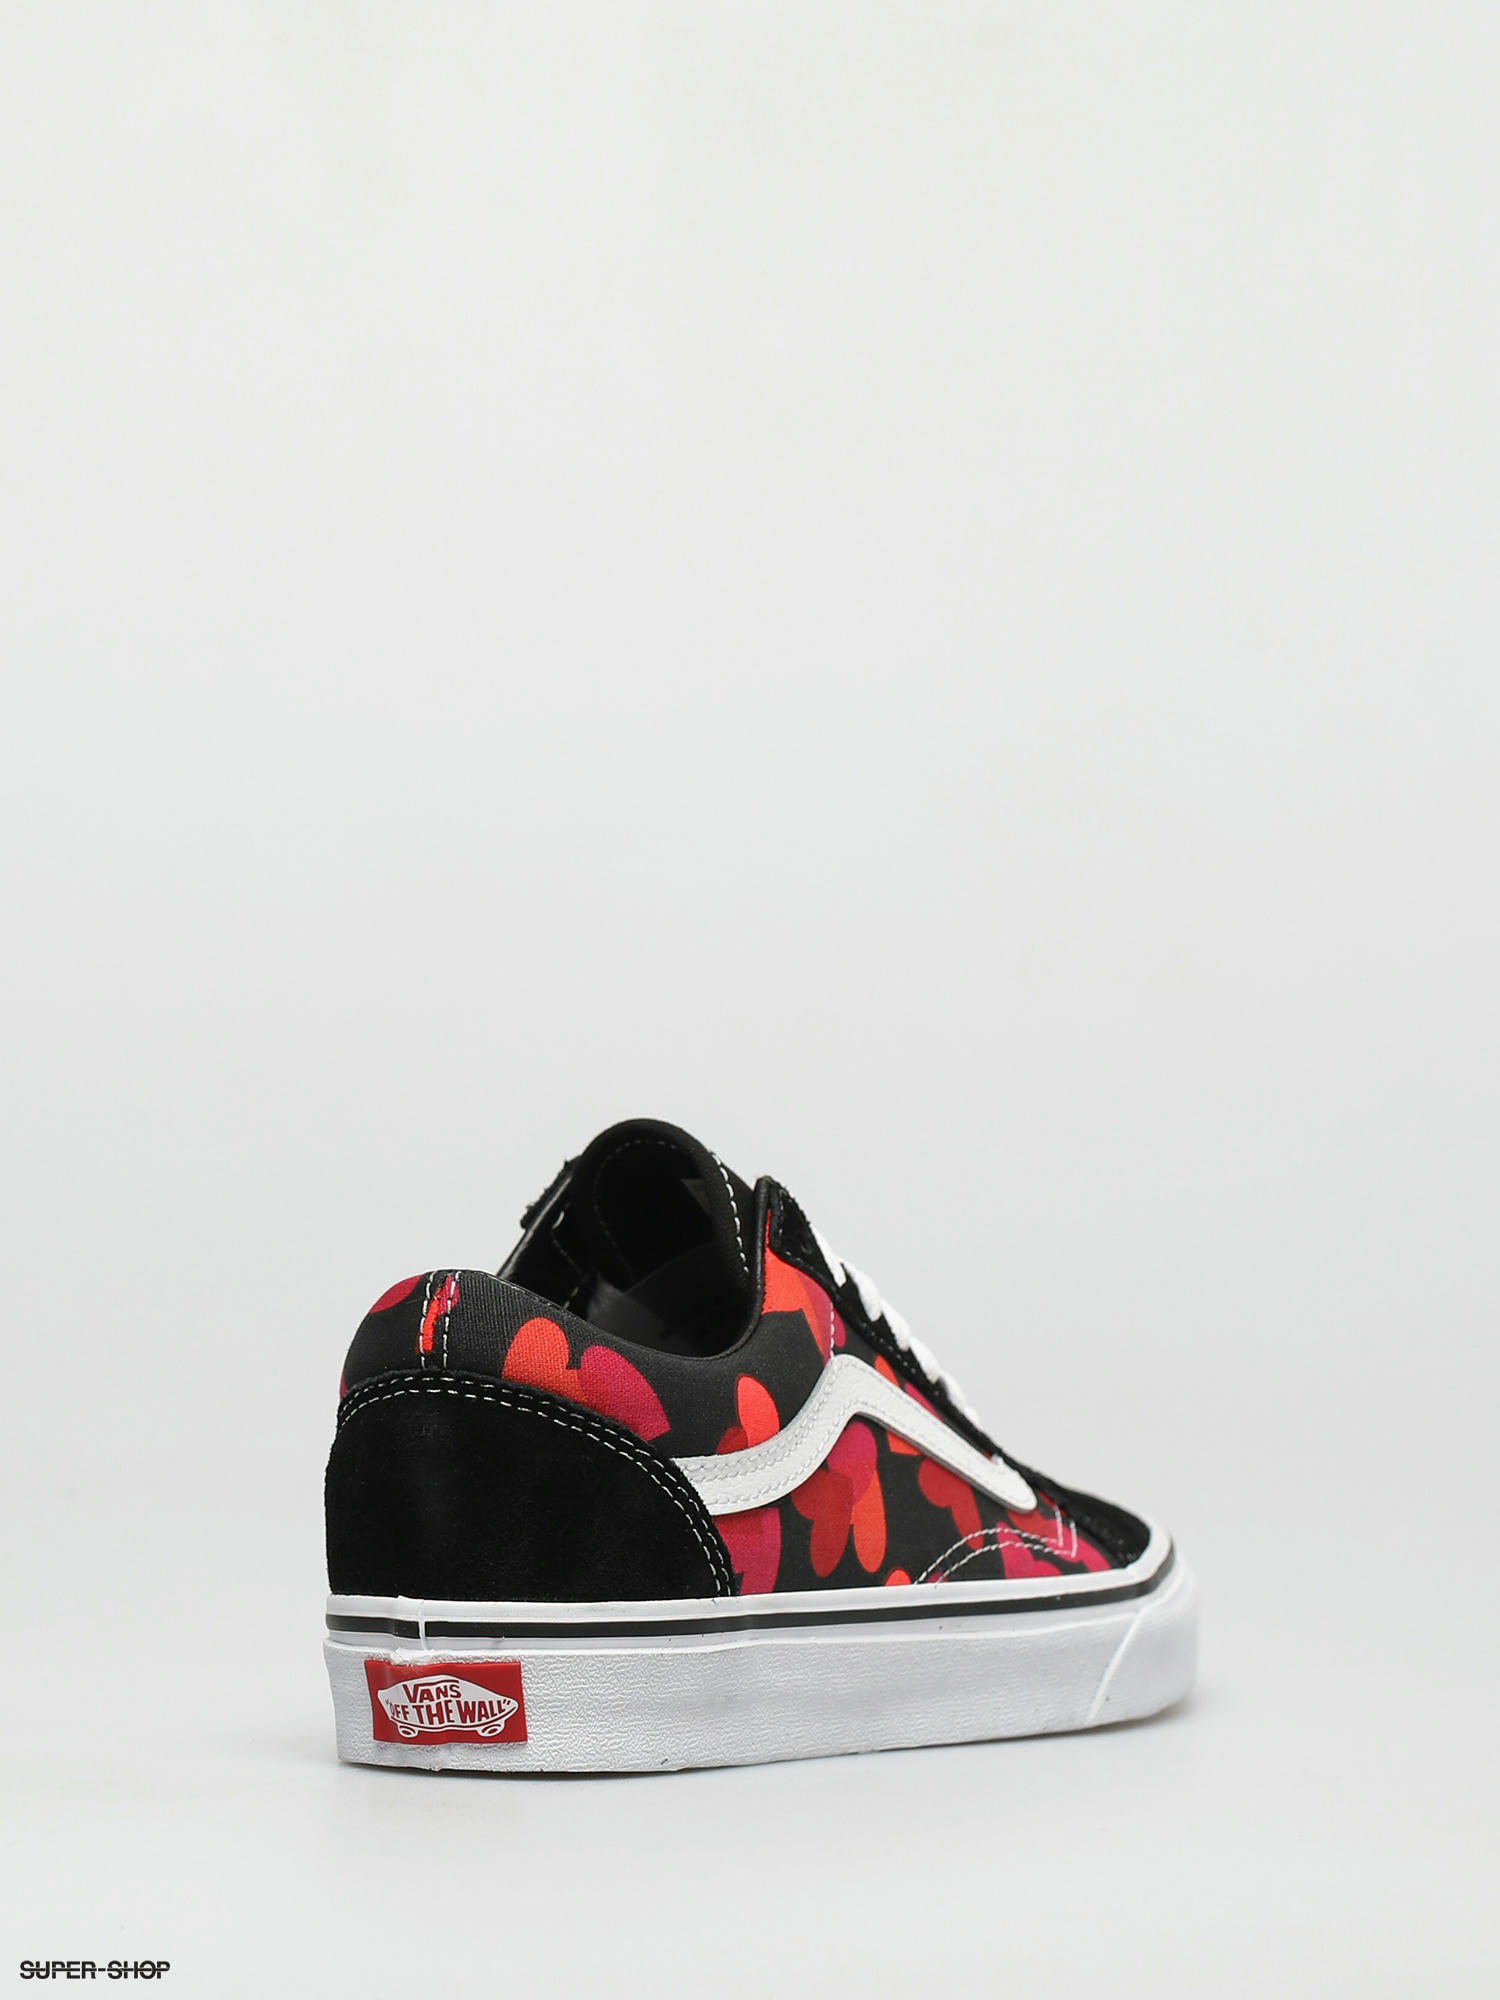 vans with hearts on them